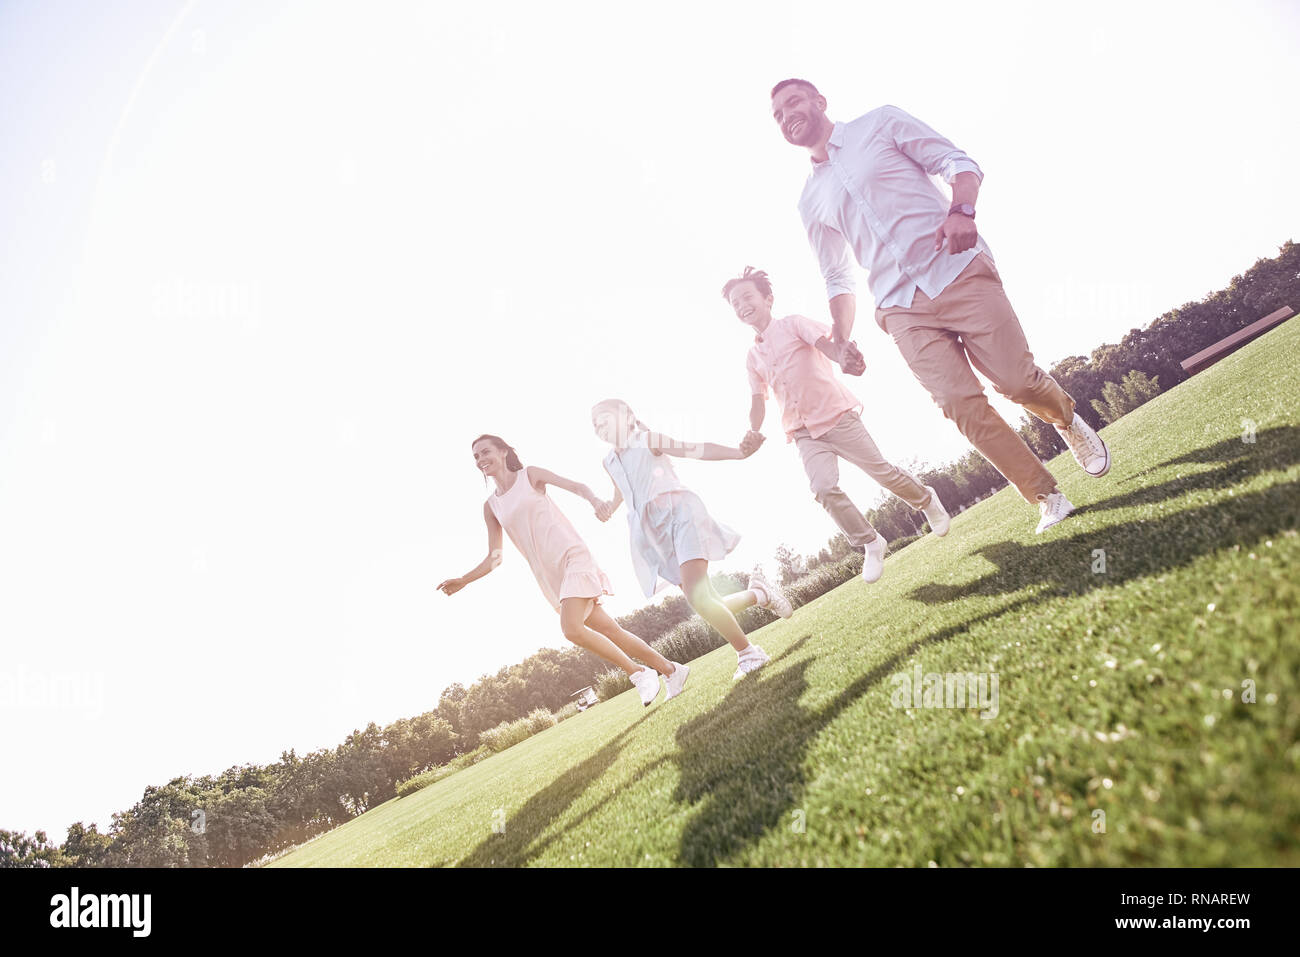 Four Glad Kids Happily Playing Running Stock Photo 740951944